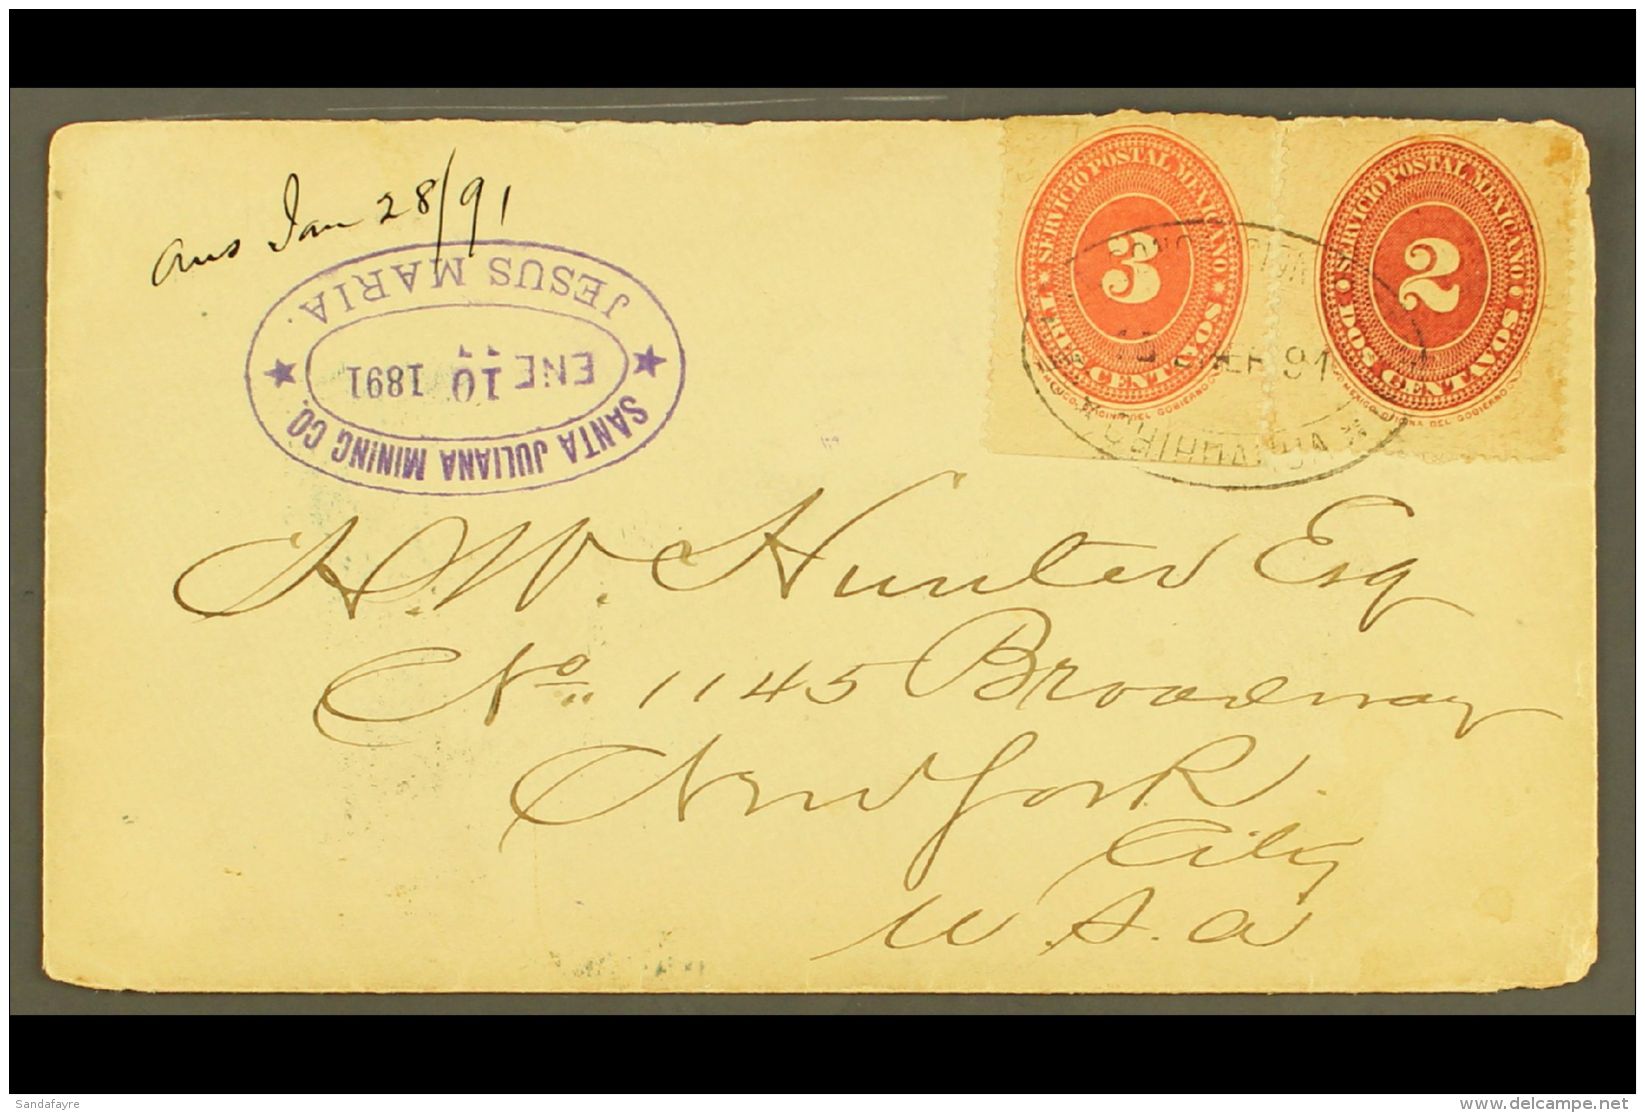 MINING MEXICO 1891 (10 Jan) Cover With Oval "Santa Juliana Mining Co, Jesus Maria" Datestamp (another Strike On... - Zonder Classificatie